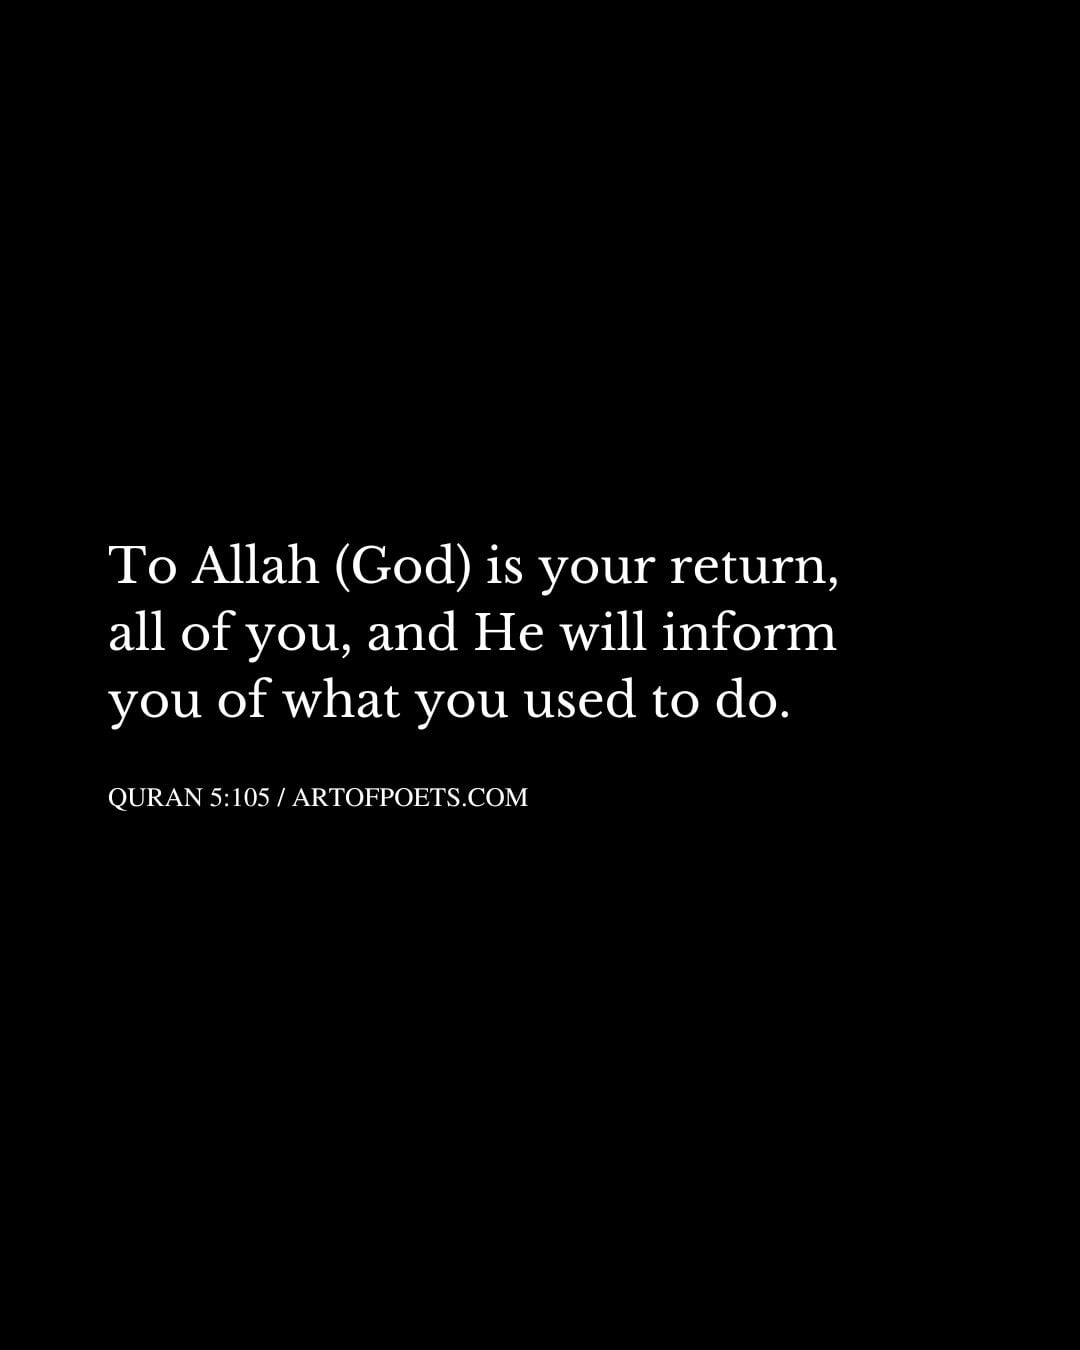 To Allah God is your return all of you and He will inform you of what you used to do